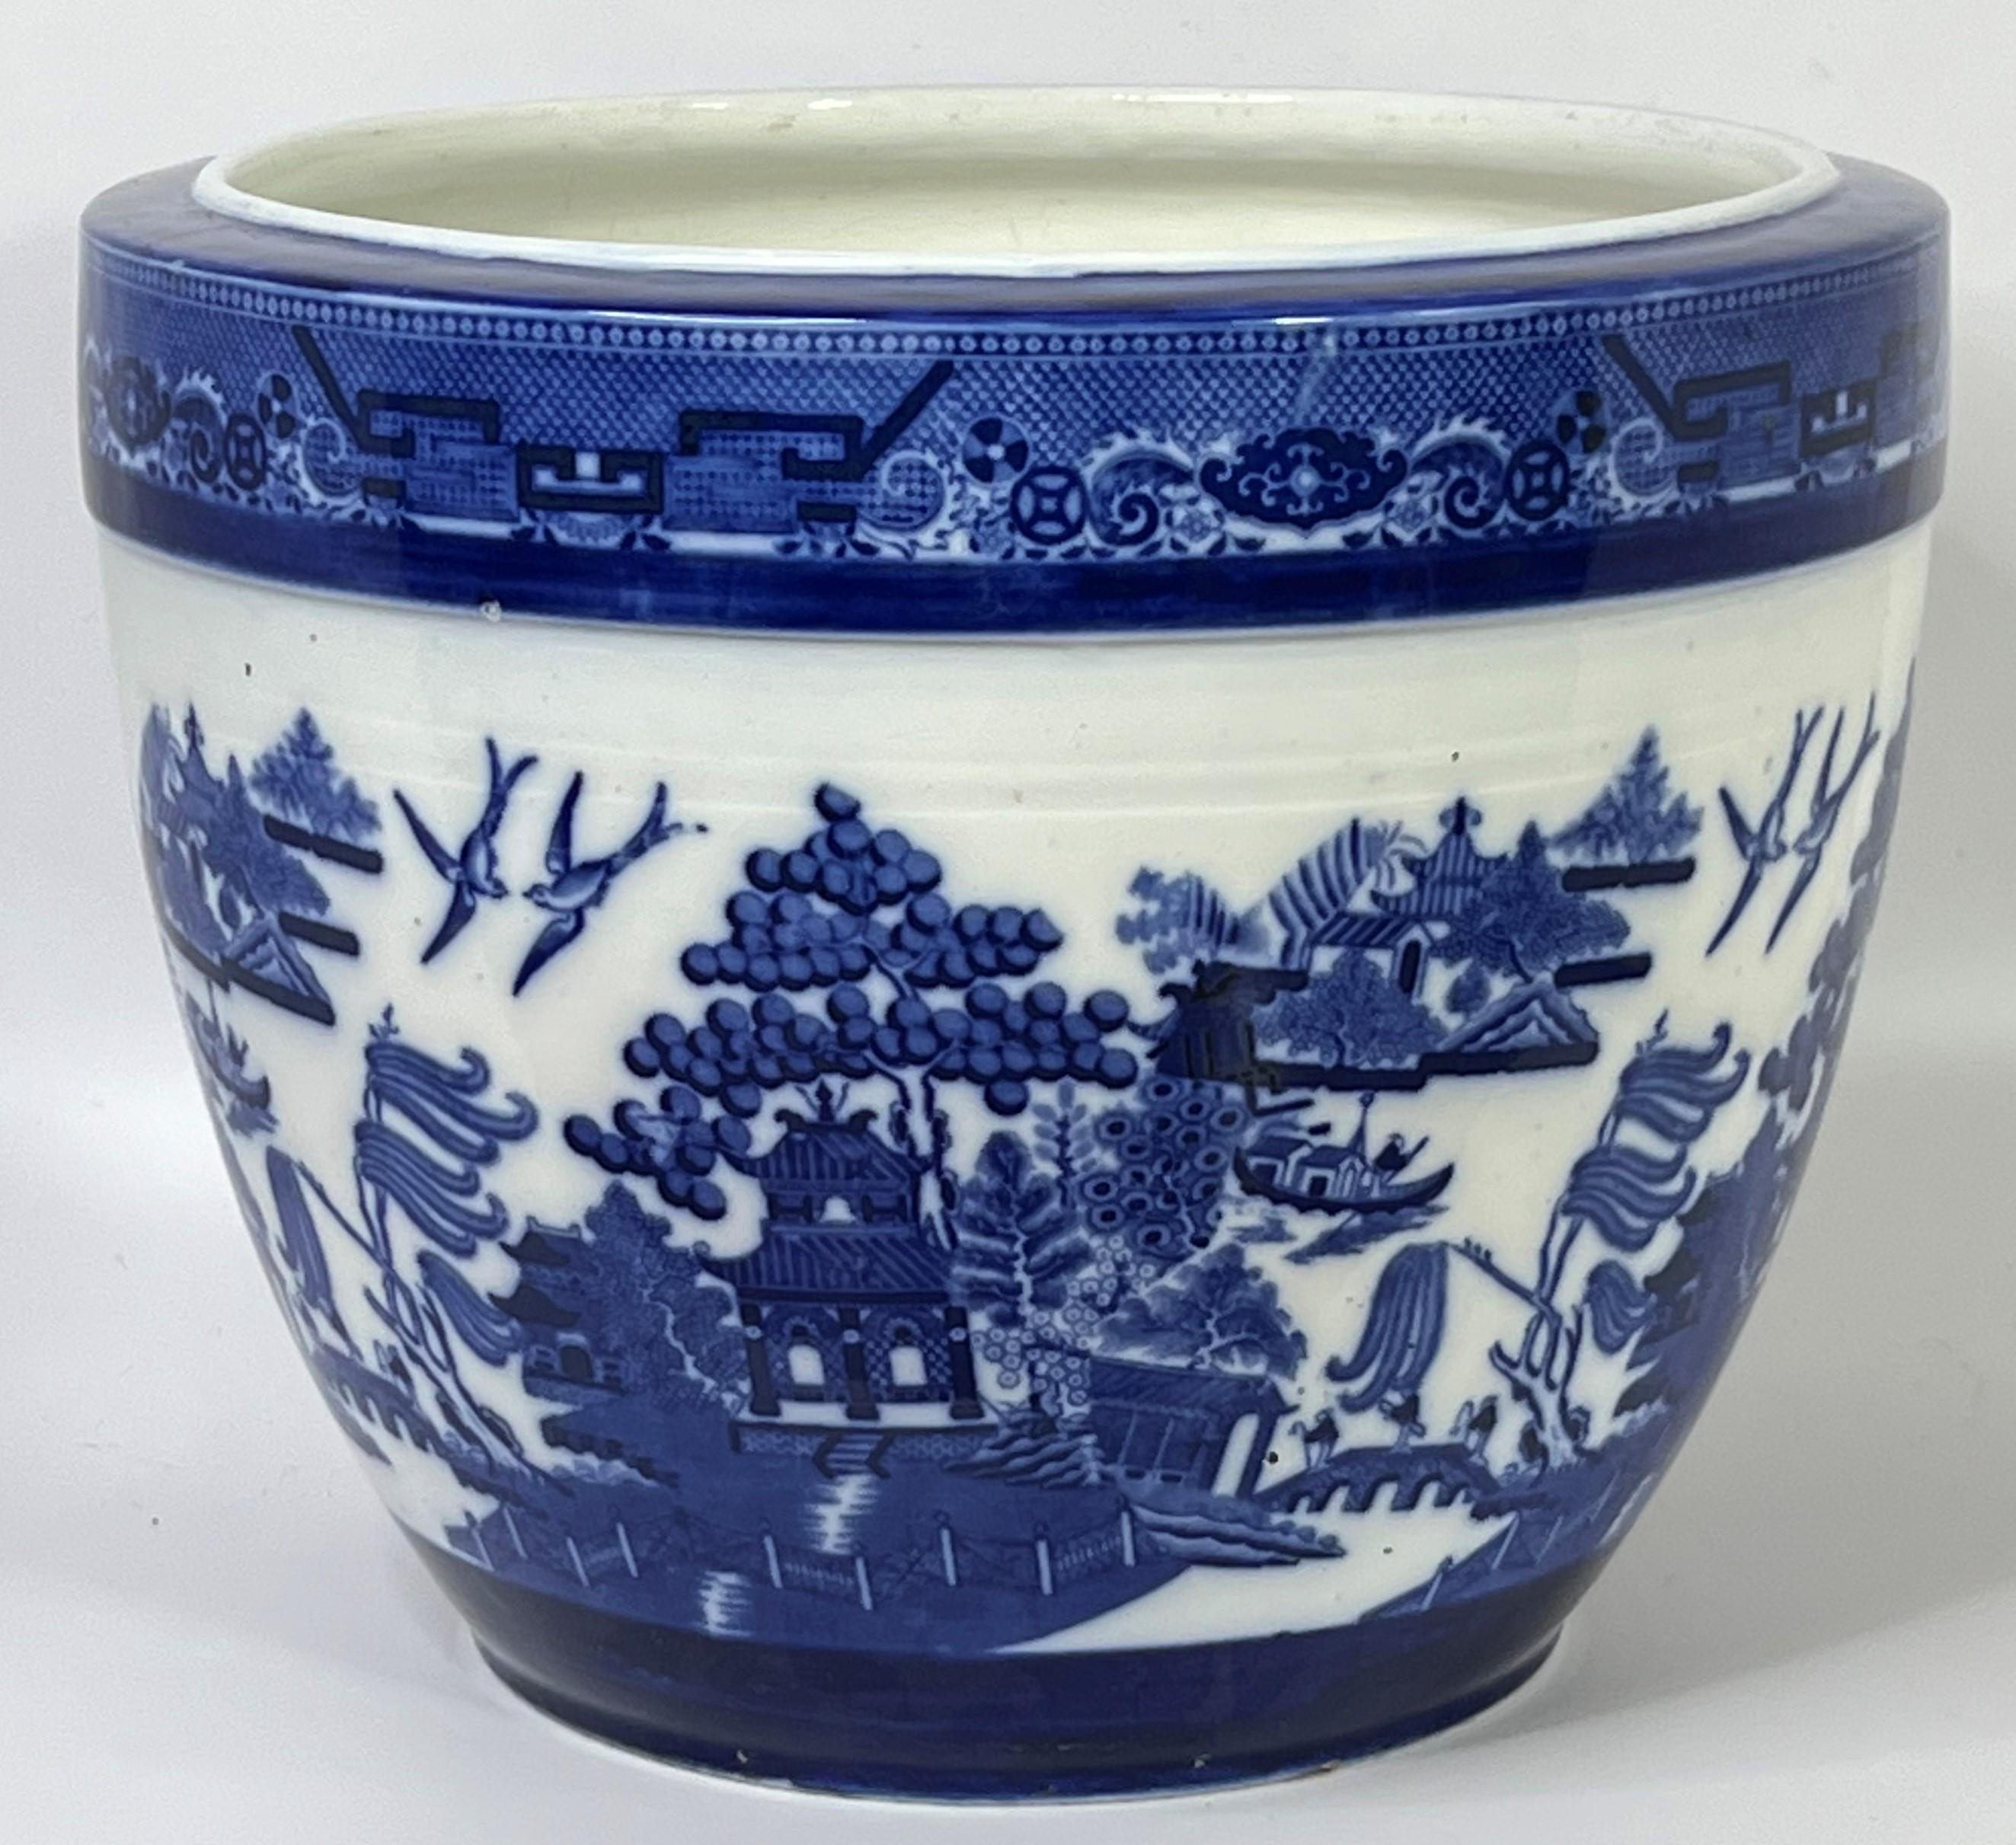 Thomas Minton is believed to have created the famous Blue Willow Pattern and sold the original design to Thomas Turner in the 18th century. The pattern is clearly inspired by Canton Chinese Export Porcelain and it is among the most popular patterns